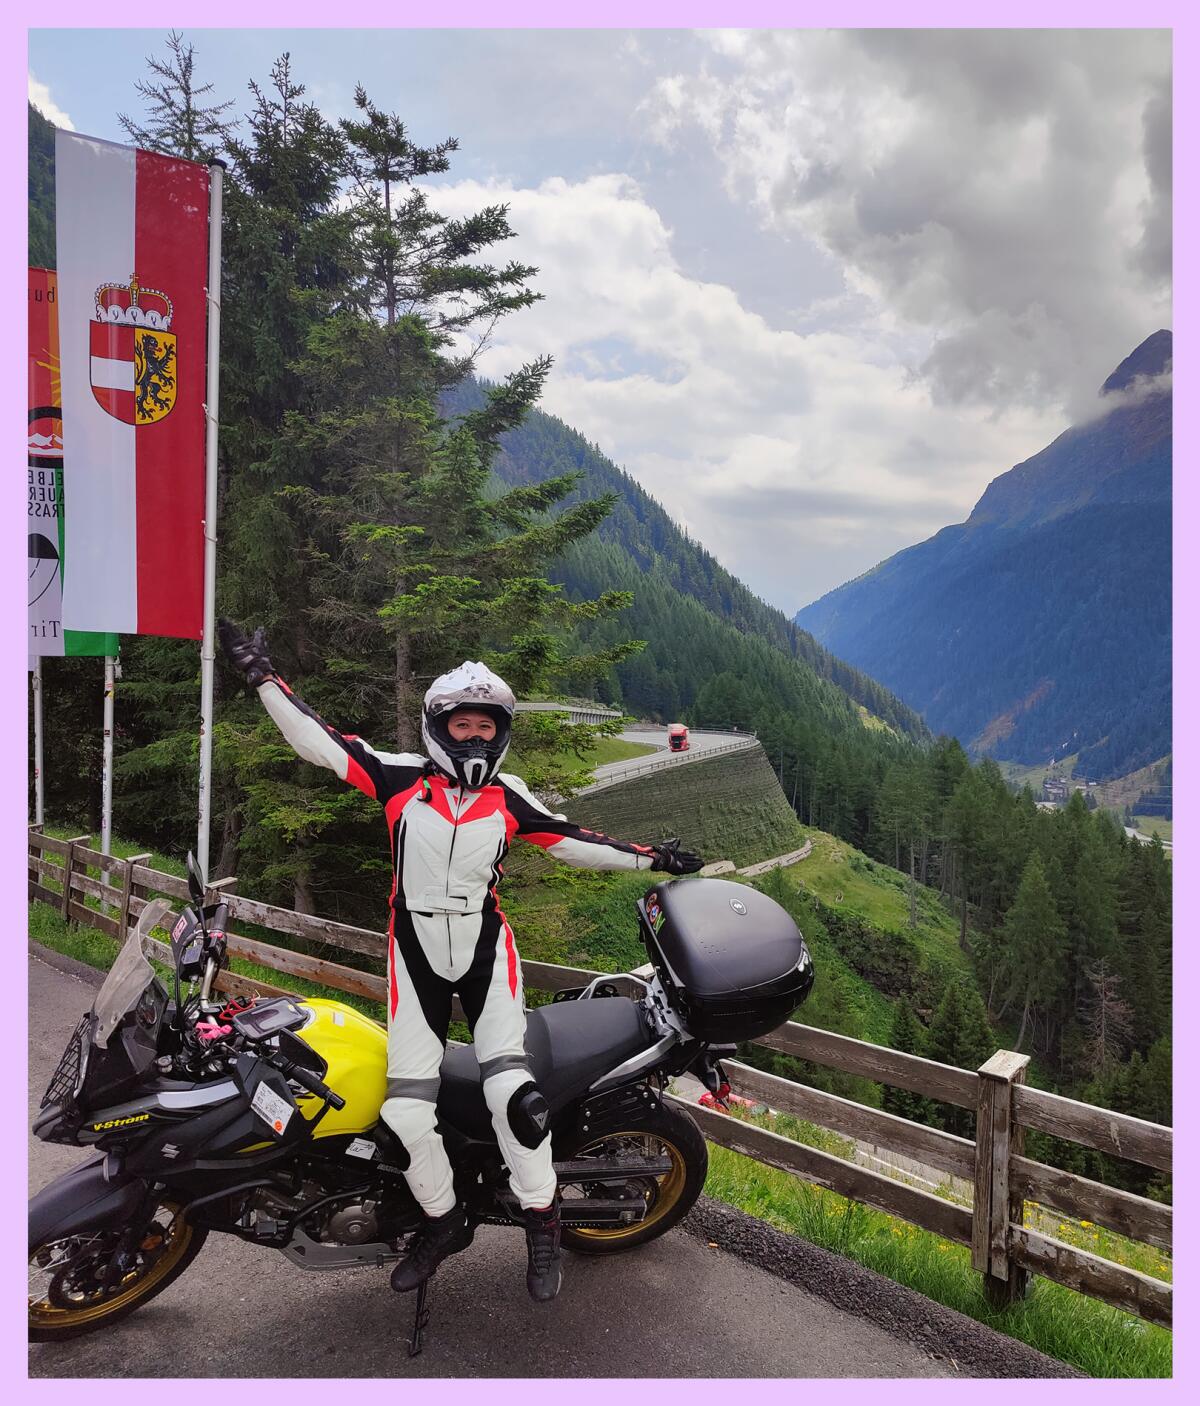 A helmeted person with outstretched arms next to a motorcycle in front of a mountain vista